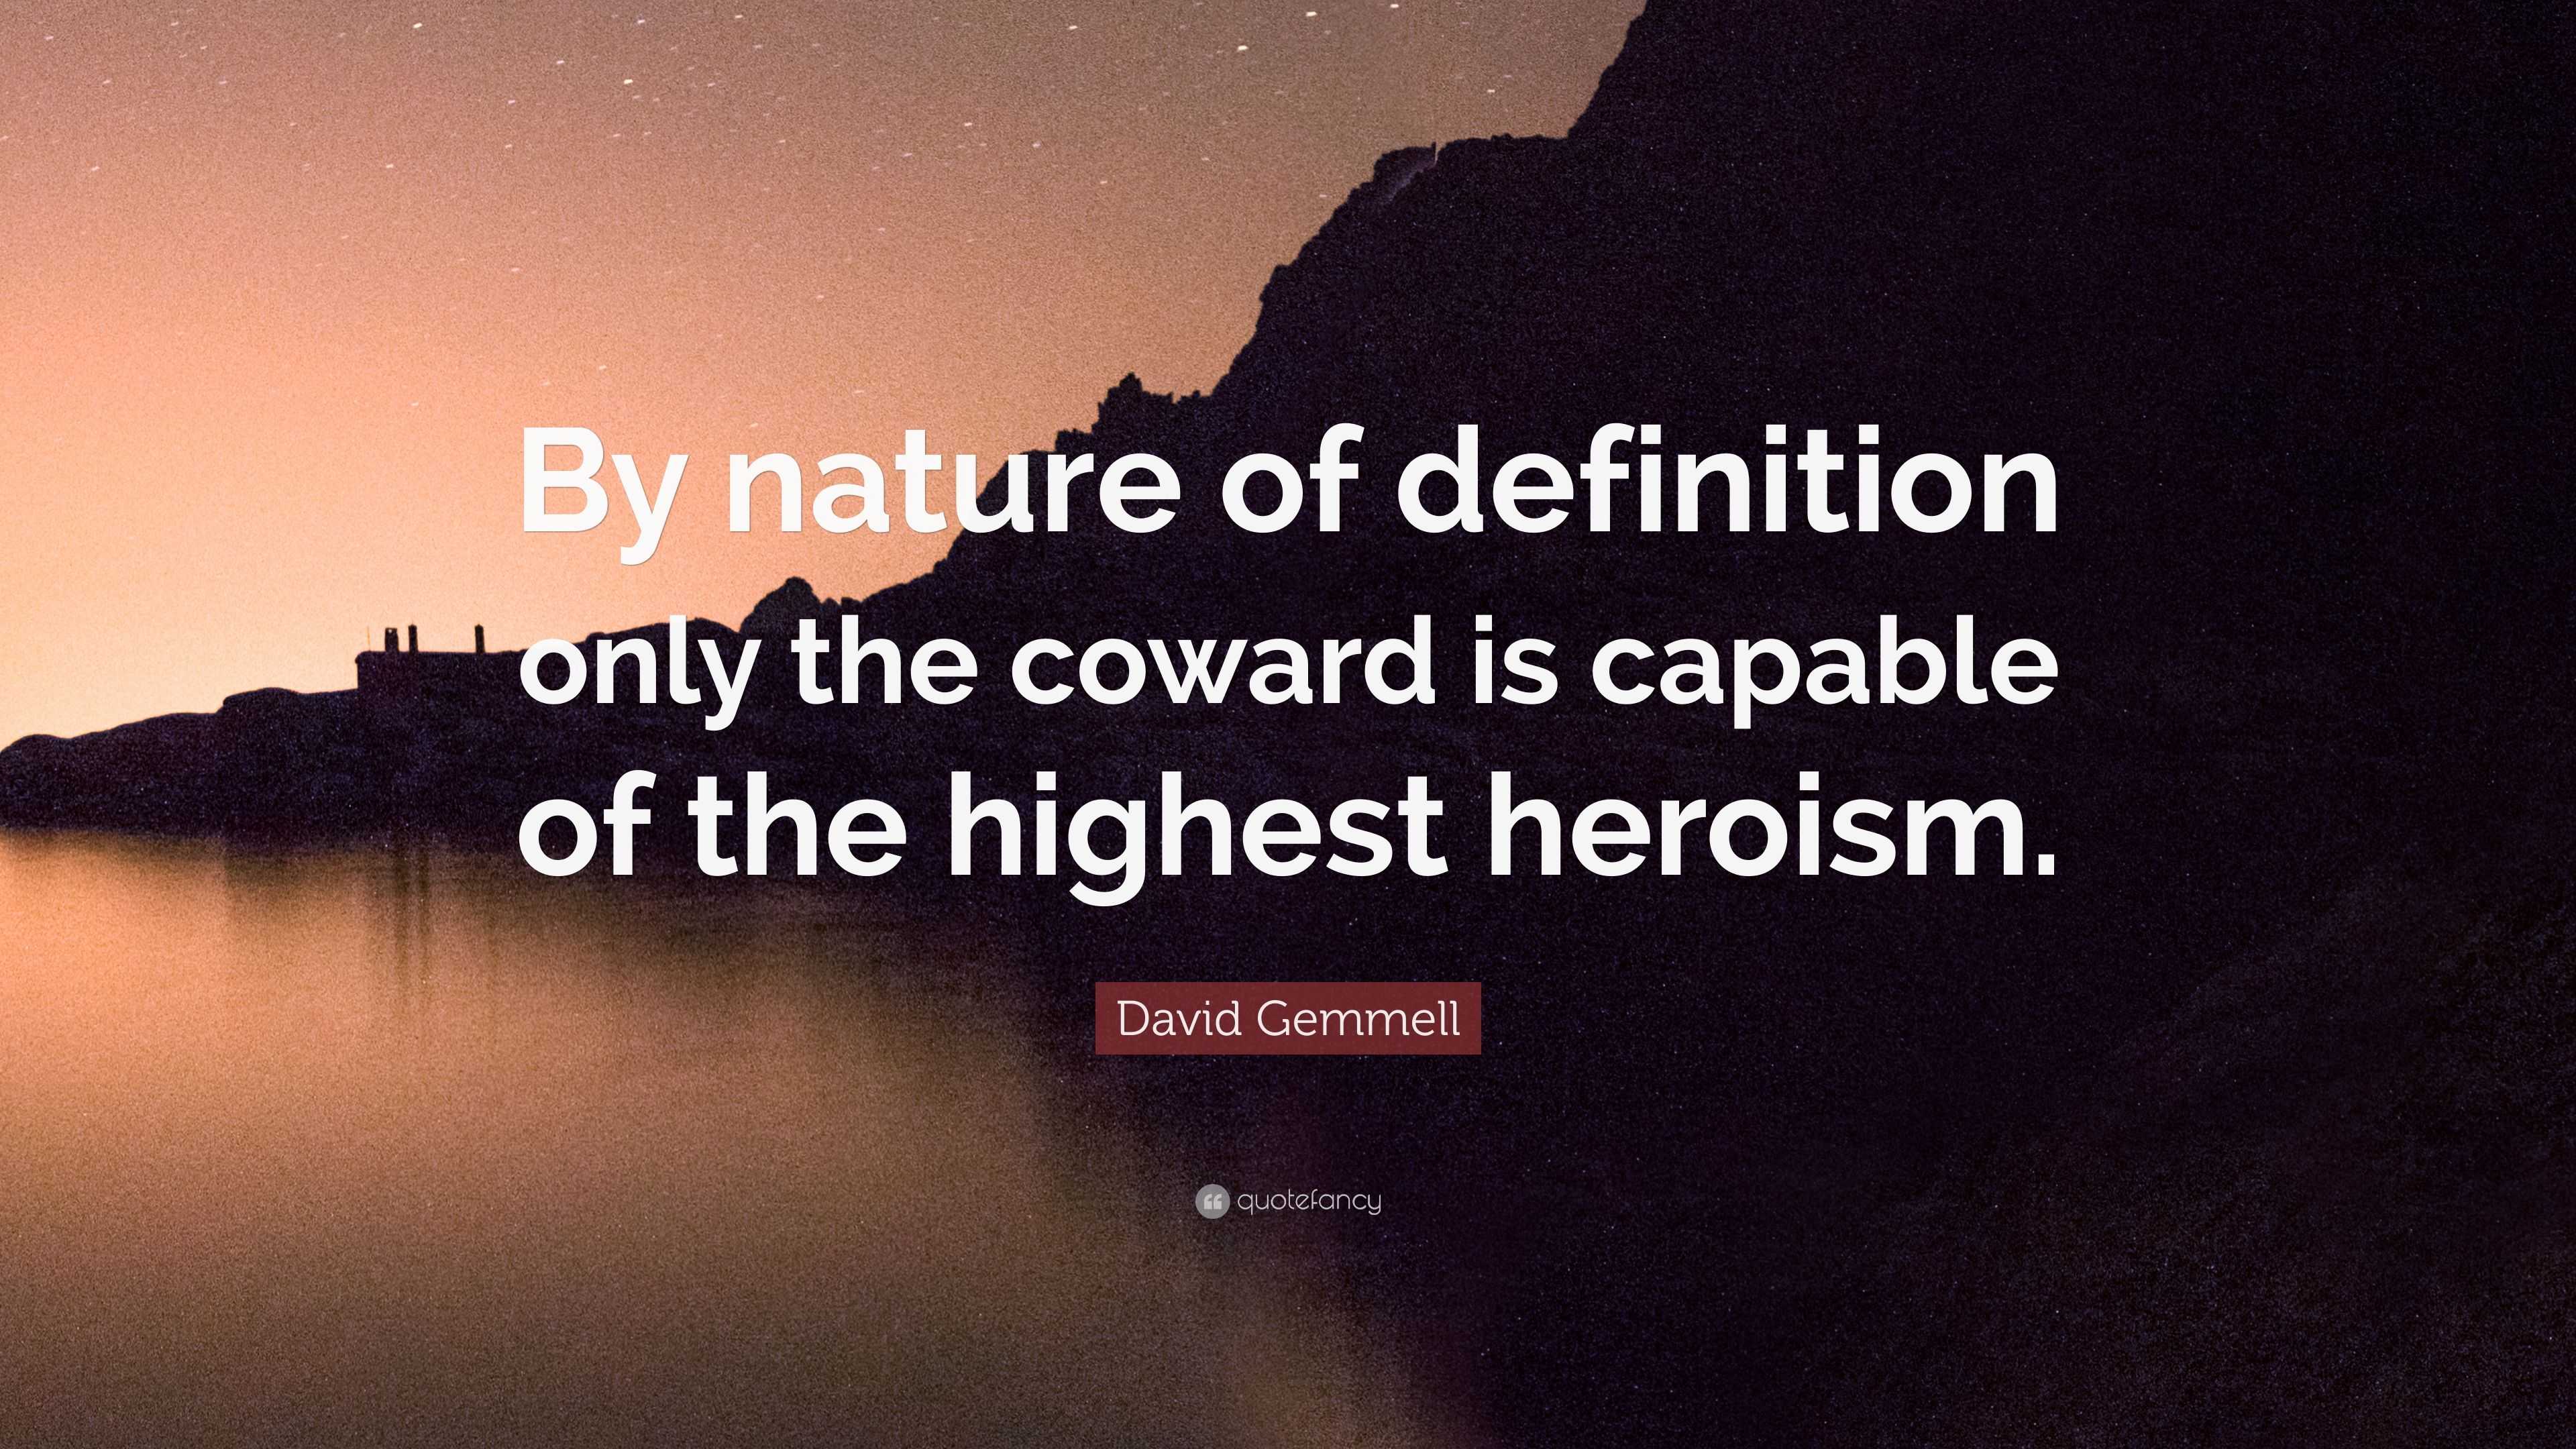 David Quote: “By nature of definition only the is capable of the highest